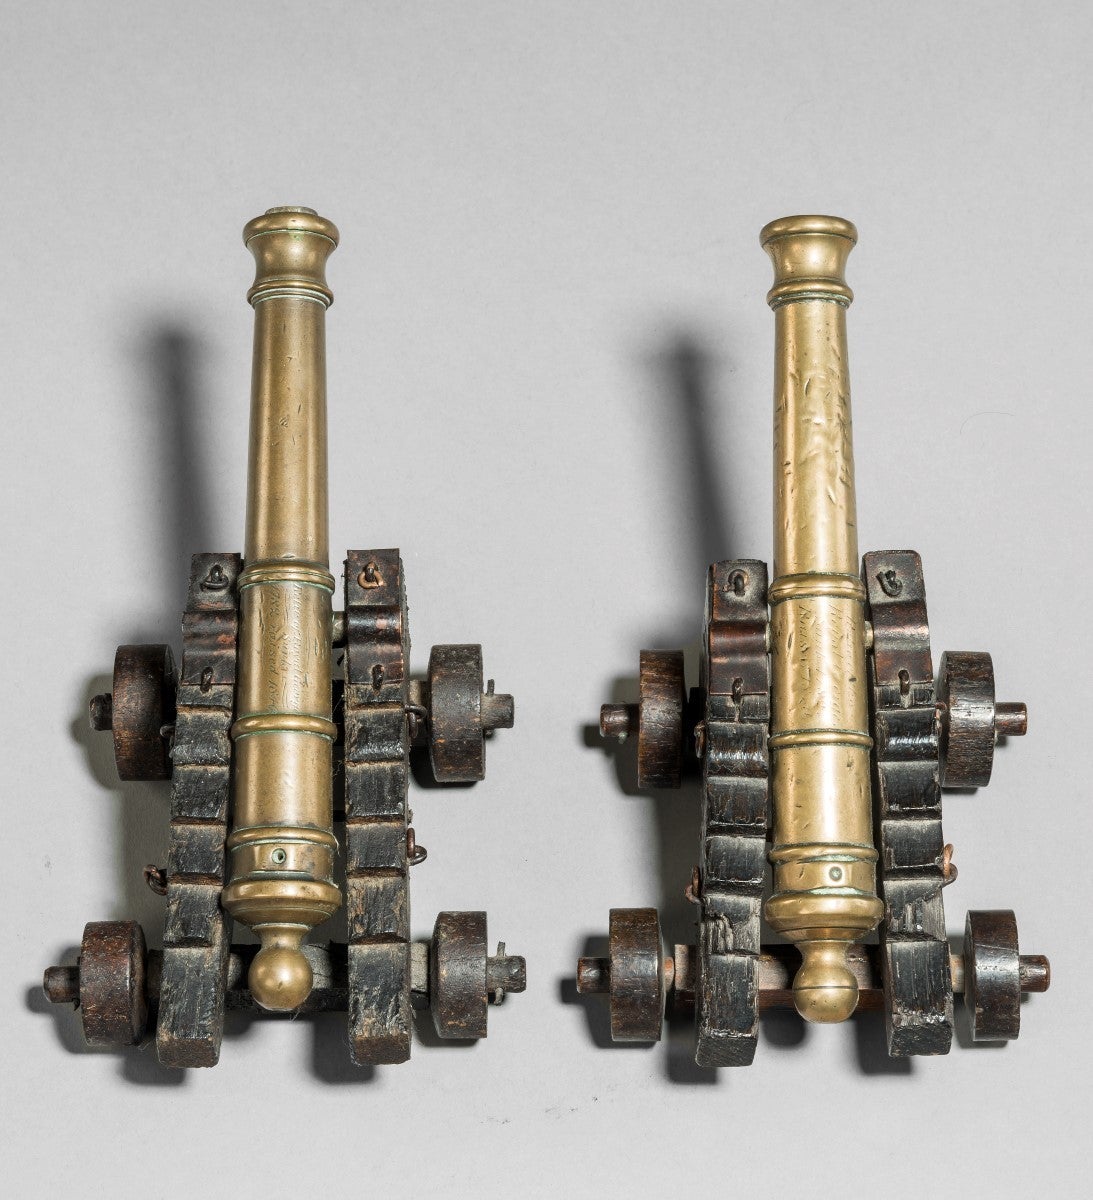 This pair of cannons on oak carriages was made in 1840 from the recovered salvage of the wreck of HMS Royal George to commemorate the disastrous sinking of the ship in 1782. Both of the barrels are inscribed in copper-plate script, one reading: